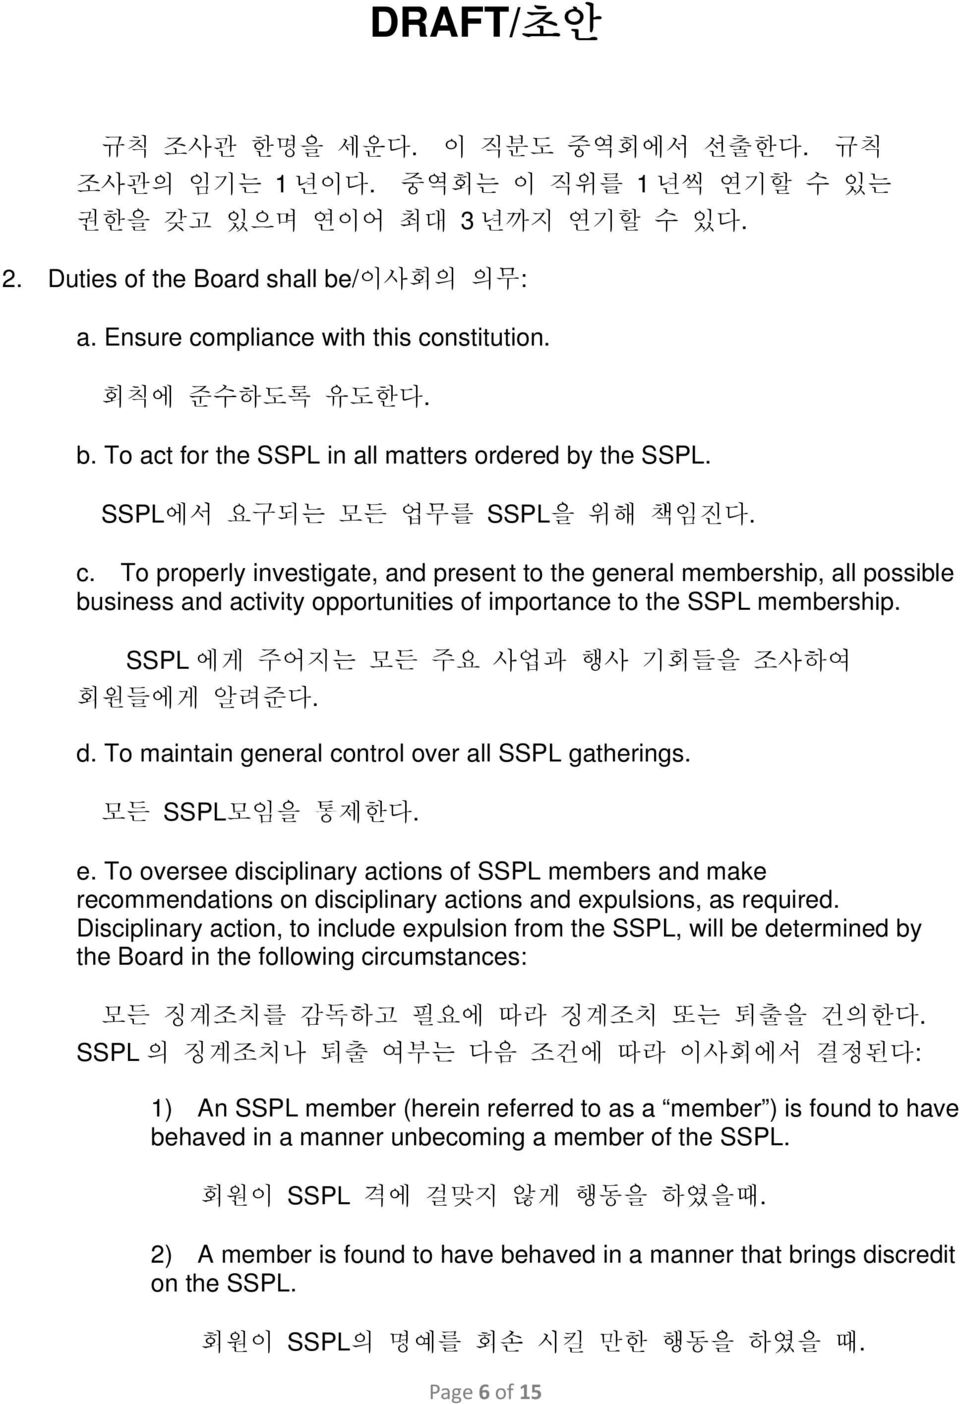 To properly investigate, and present to the general membership, all possible business and activity opportunities of importance to the SSPL membership. SSPL 에게 주어지는 모든 주요 사업과 행사 기회들을 조사하여 회원들에게 알려준다.